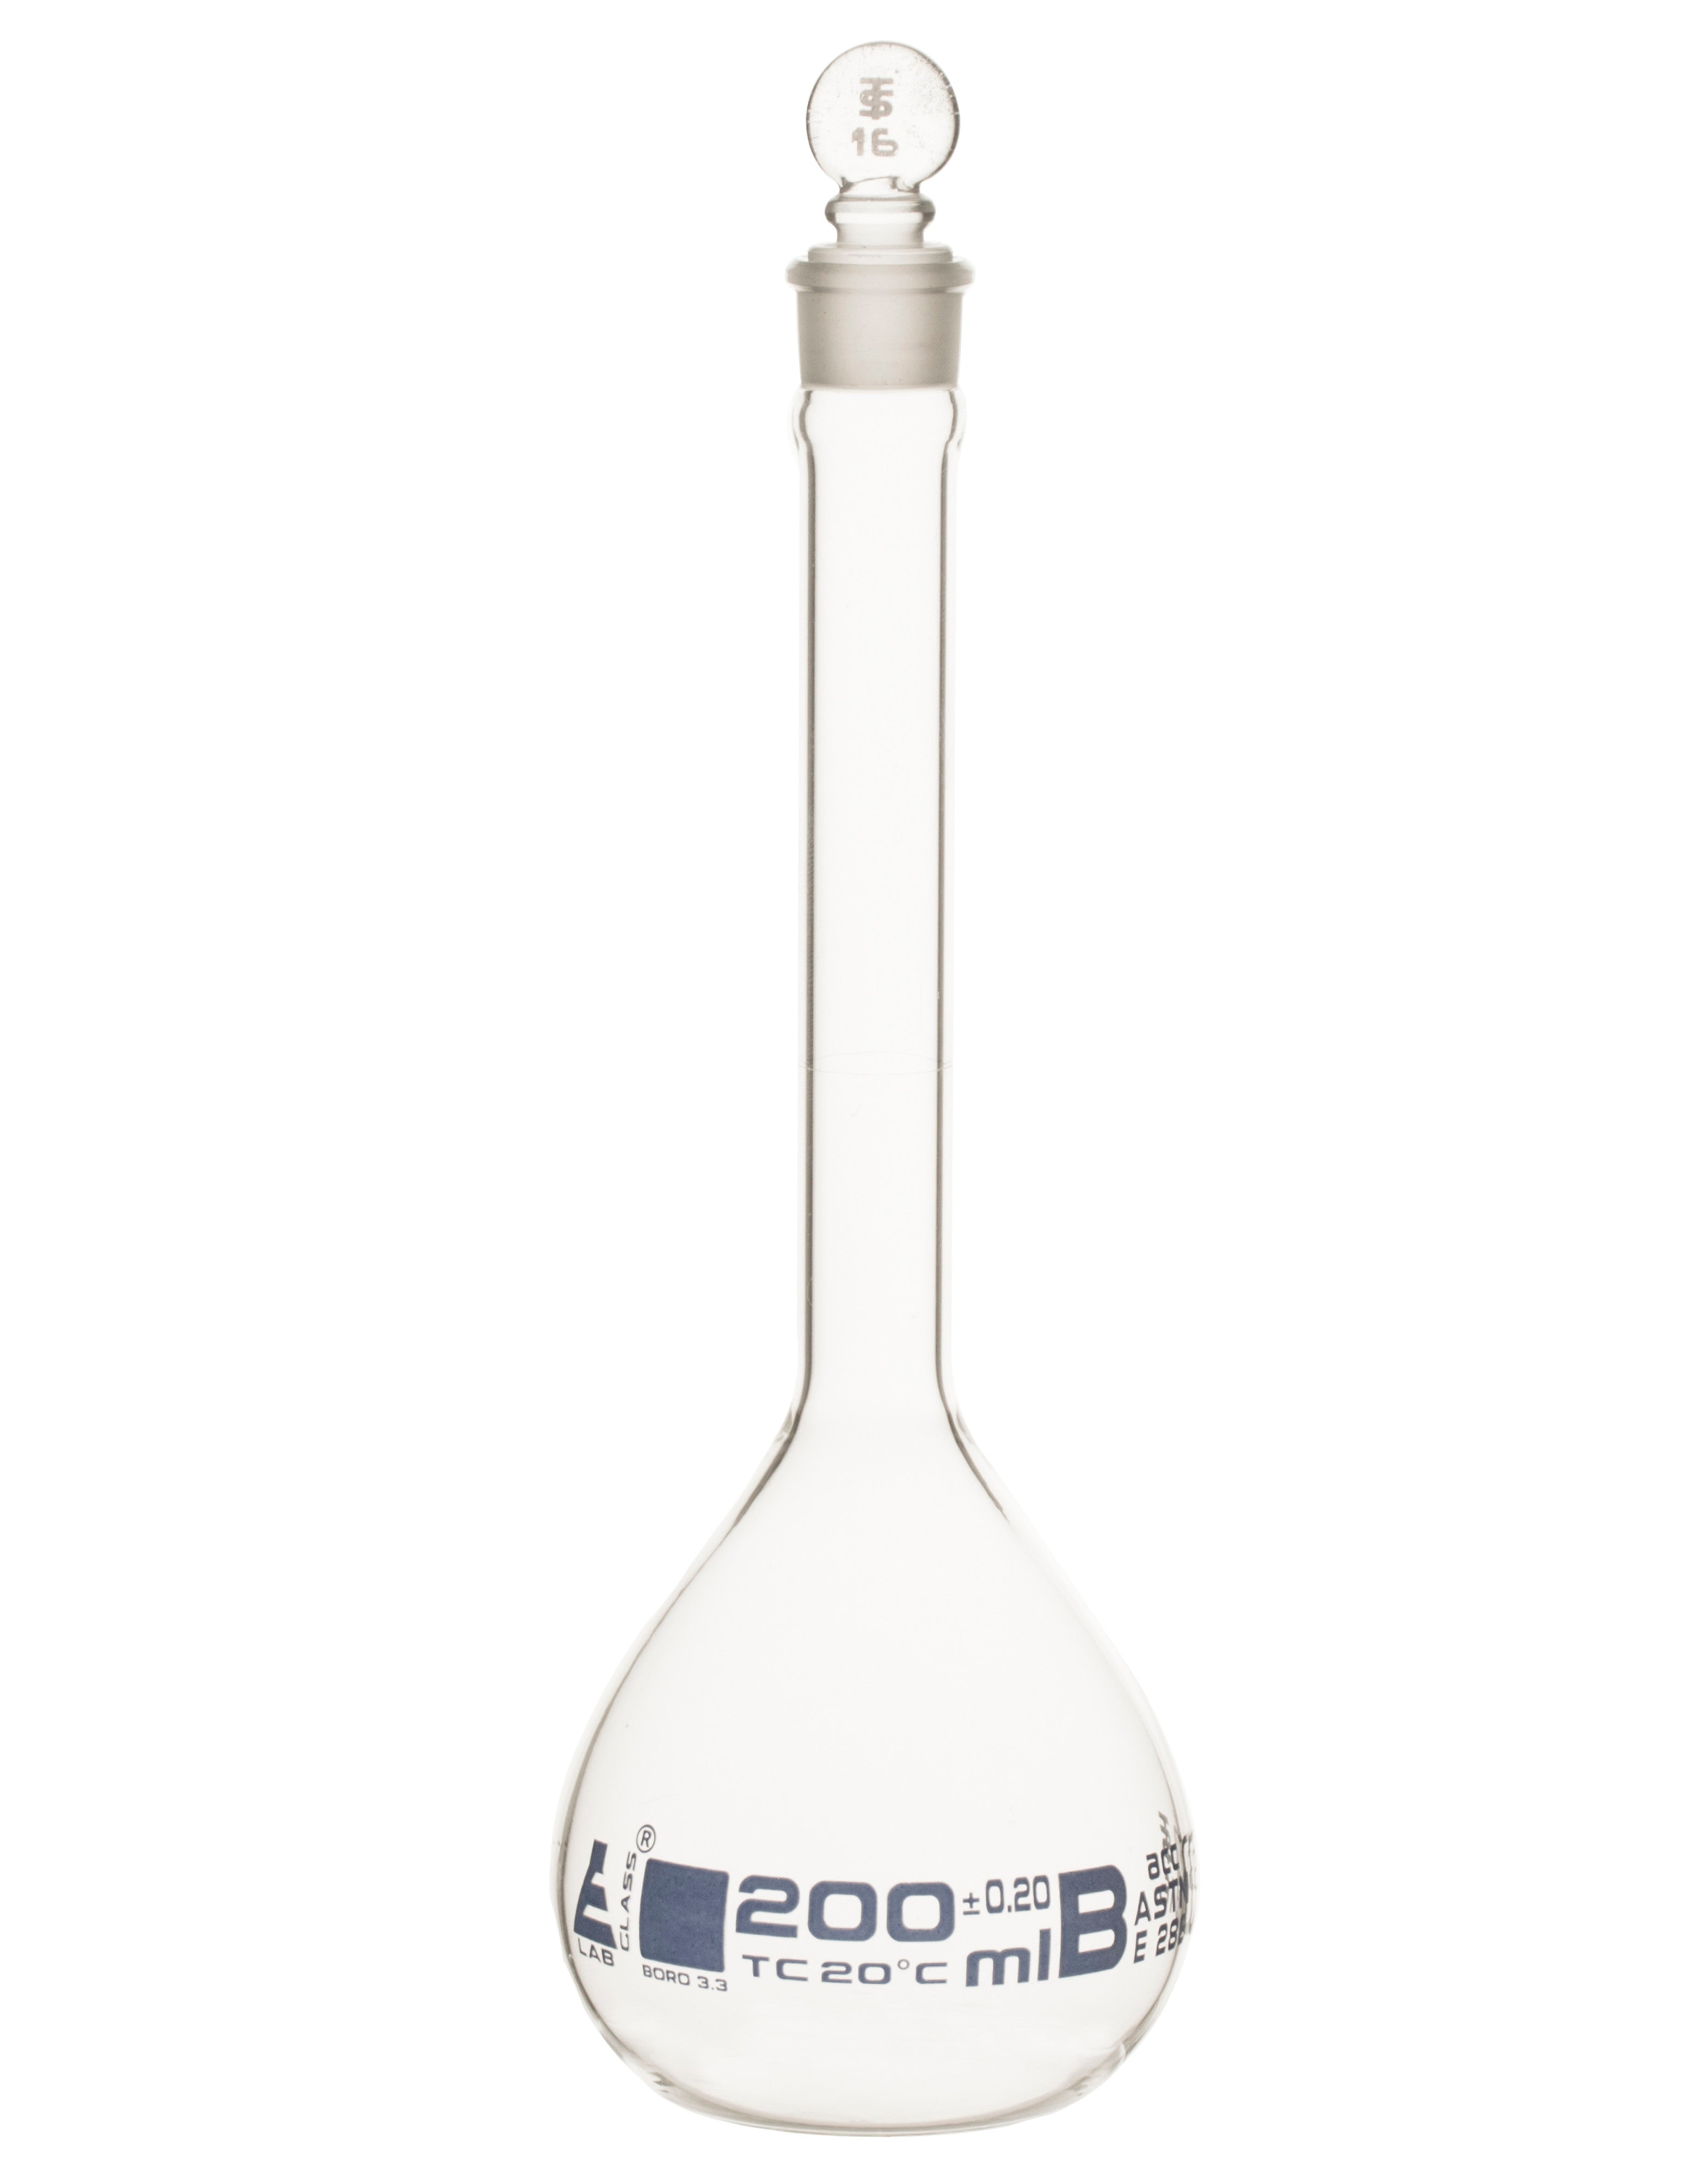 Borosilicate Glass ASTM Volumetric Flask with Glass Stopper, 200 ml, Class B, Autoclavable